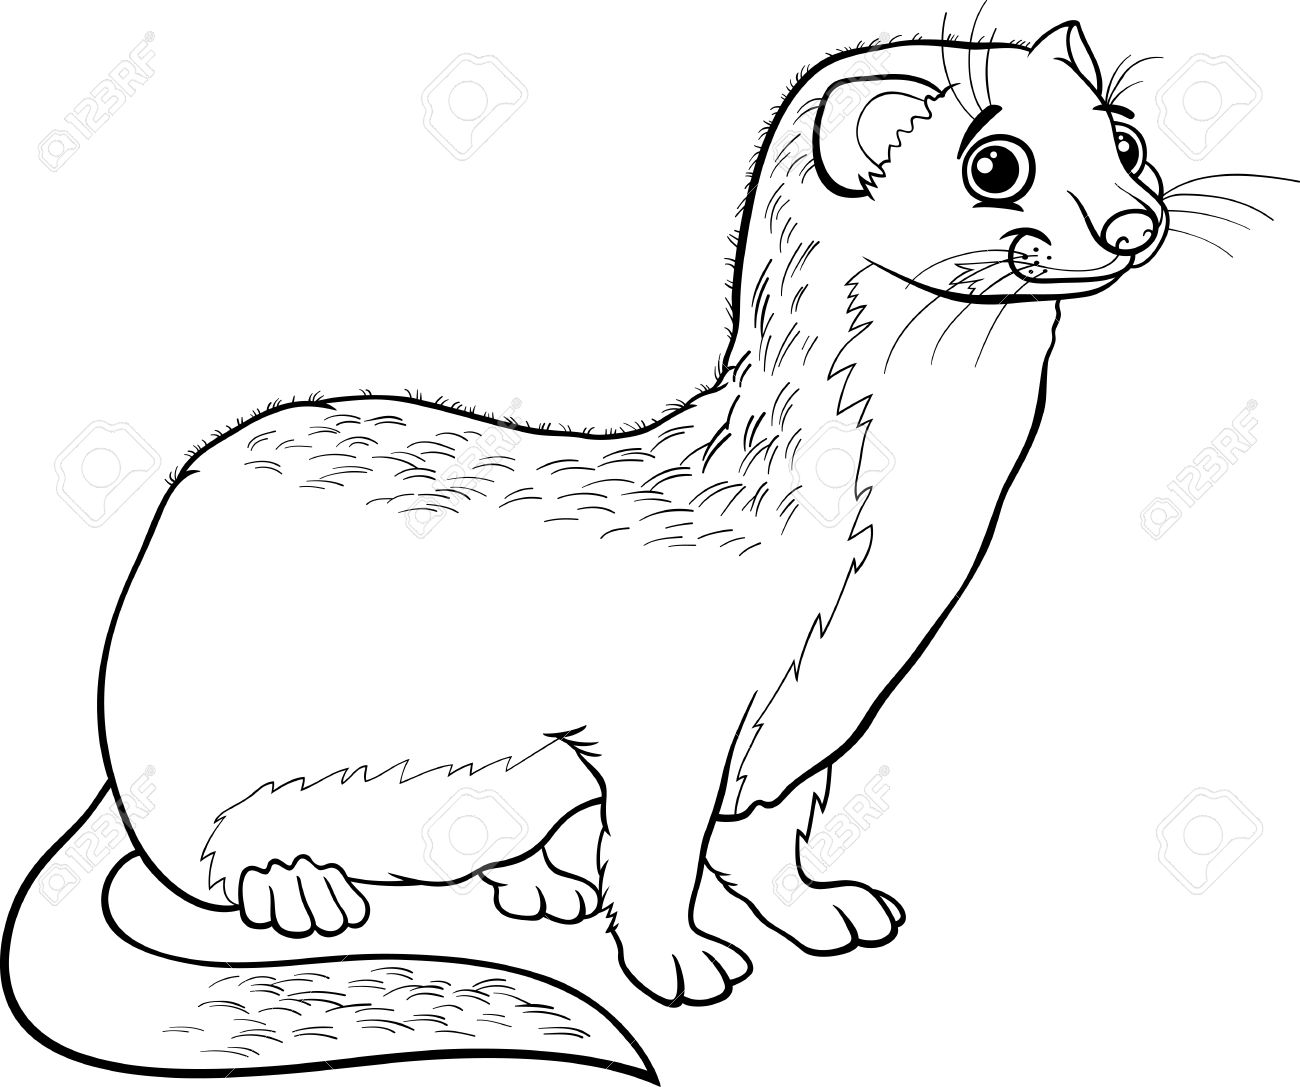 Weasel coloring, Download Weasel coloring for free 2019